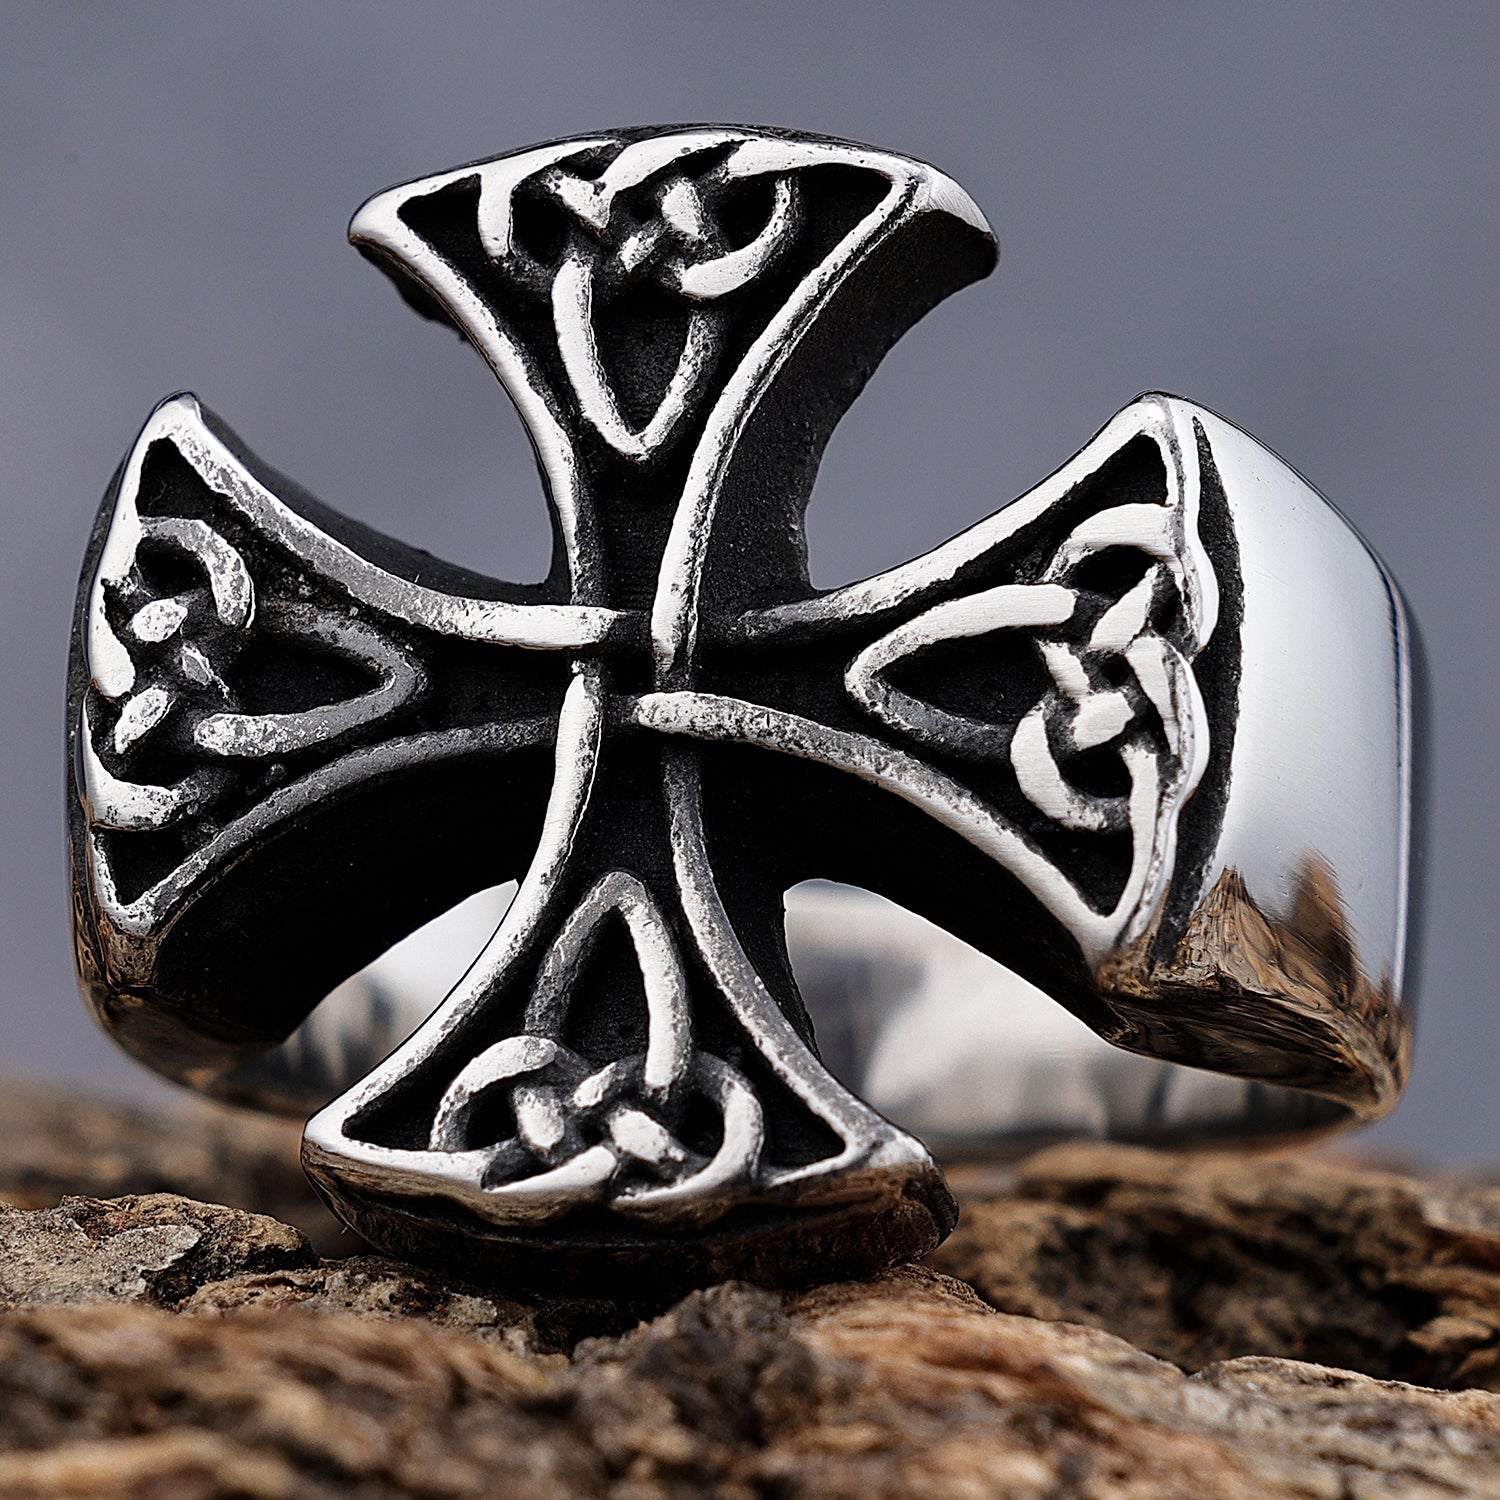 Equal-armed Celtic Knot Cross Ring